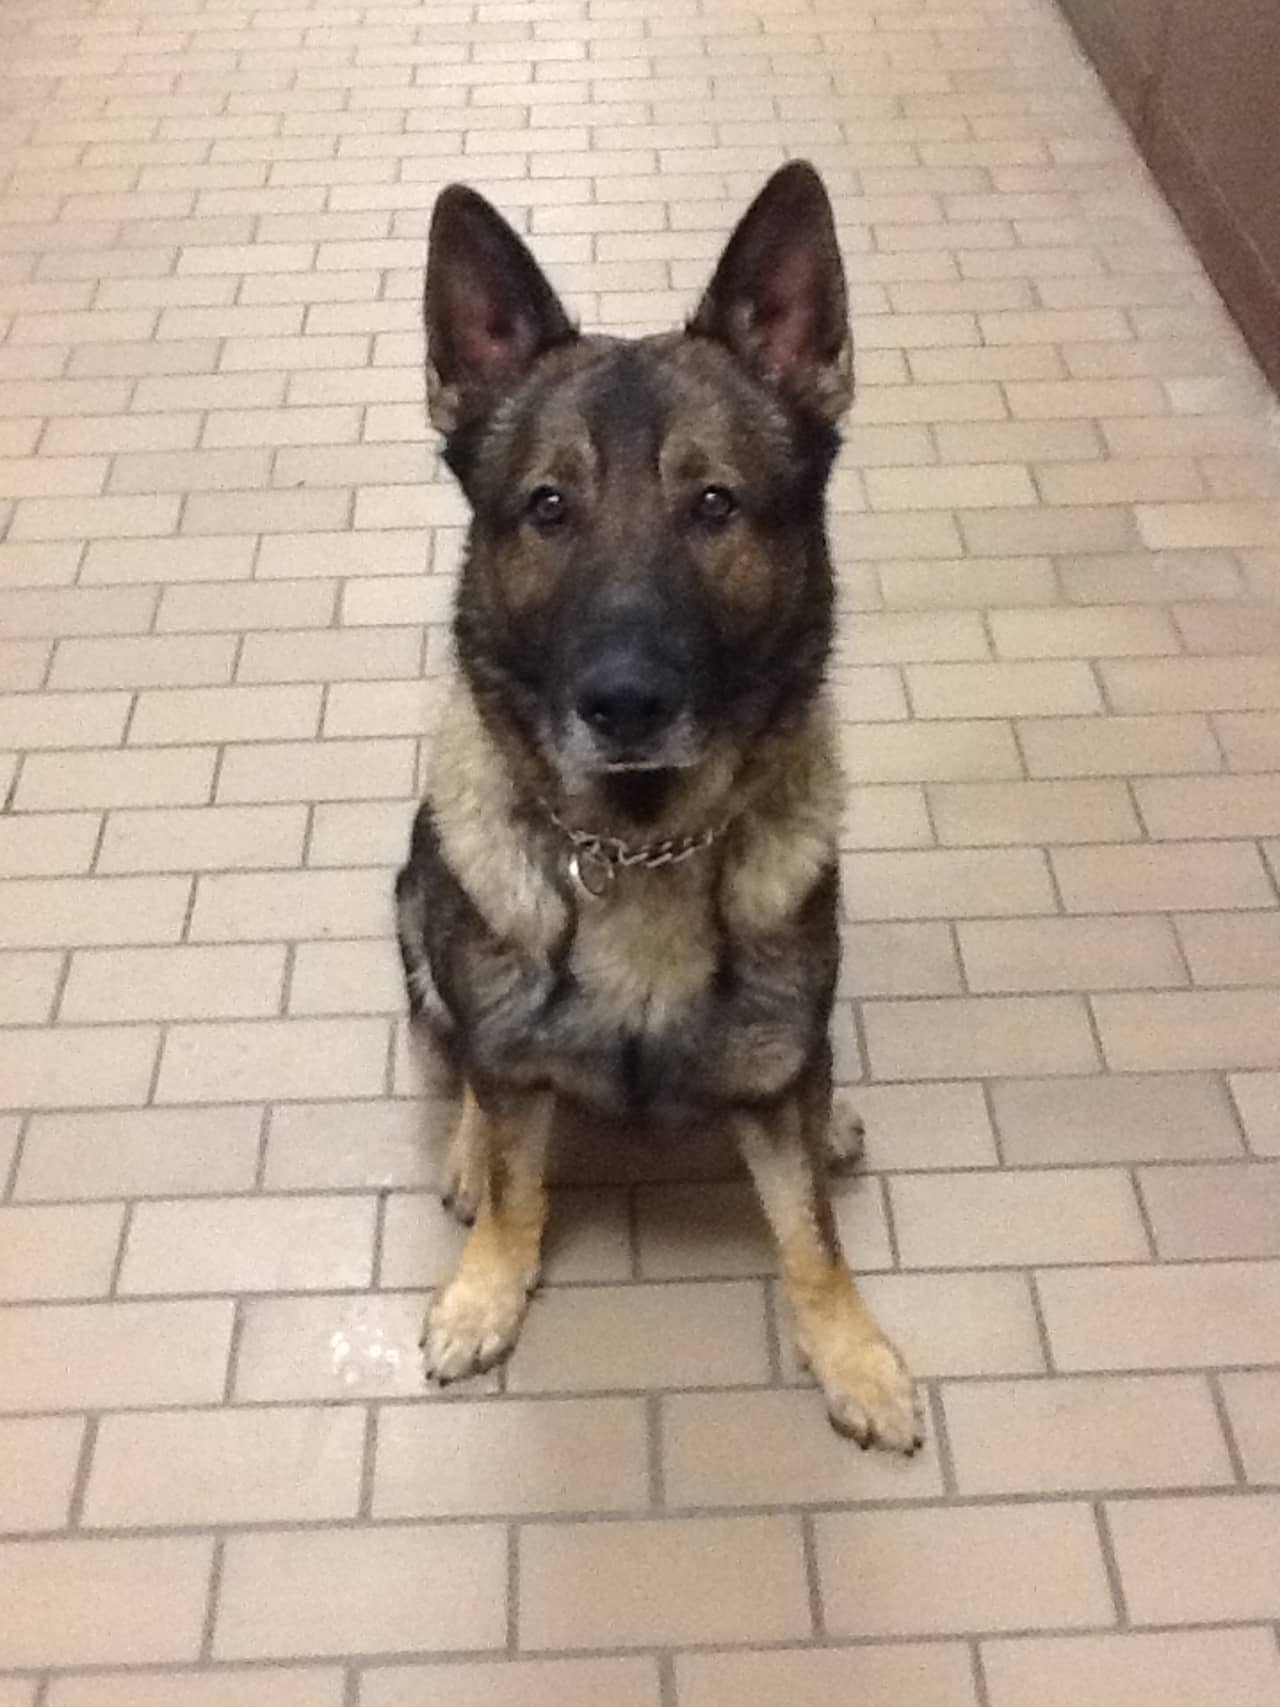 Rocky, a K9 member of the New Canaan police department, choked to death on a training ball Sunday. 